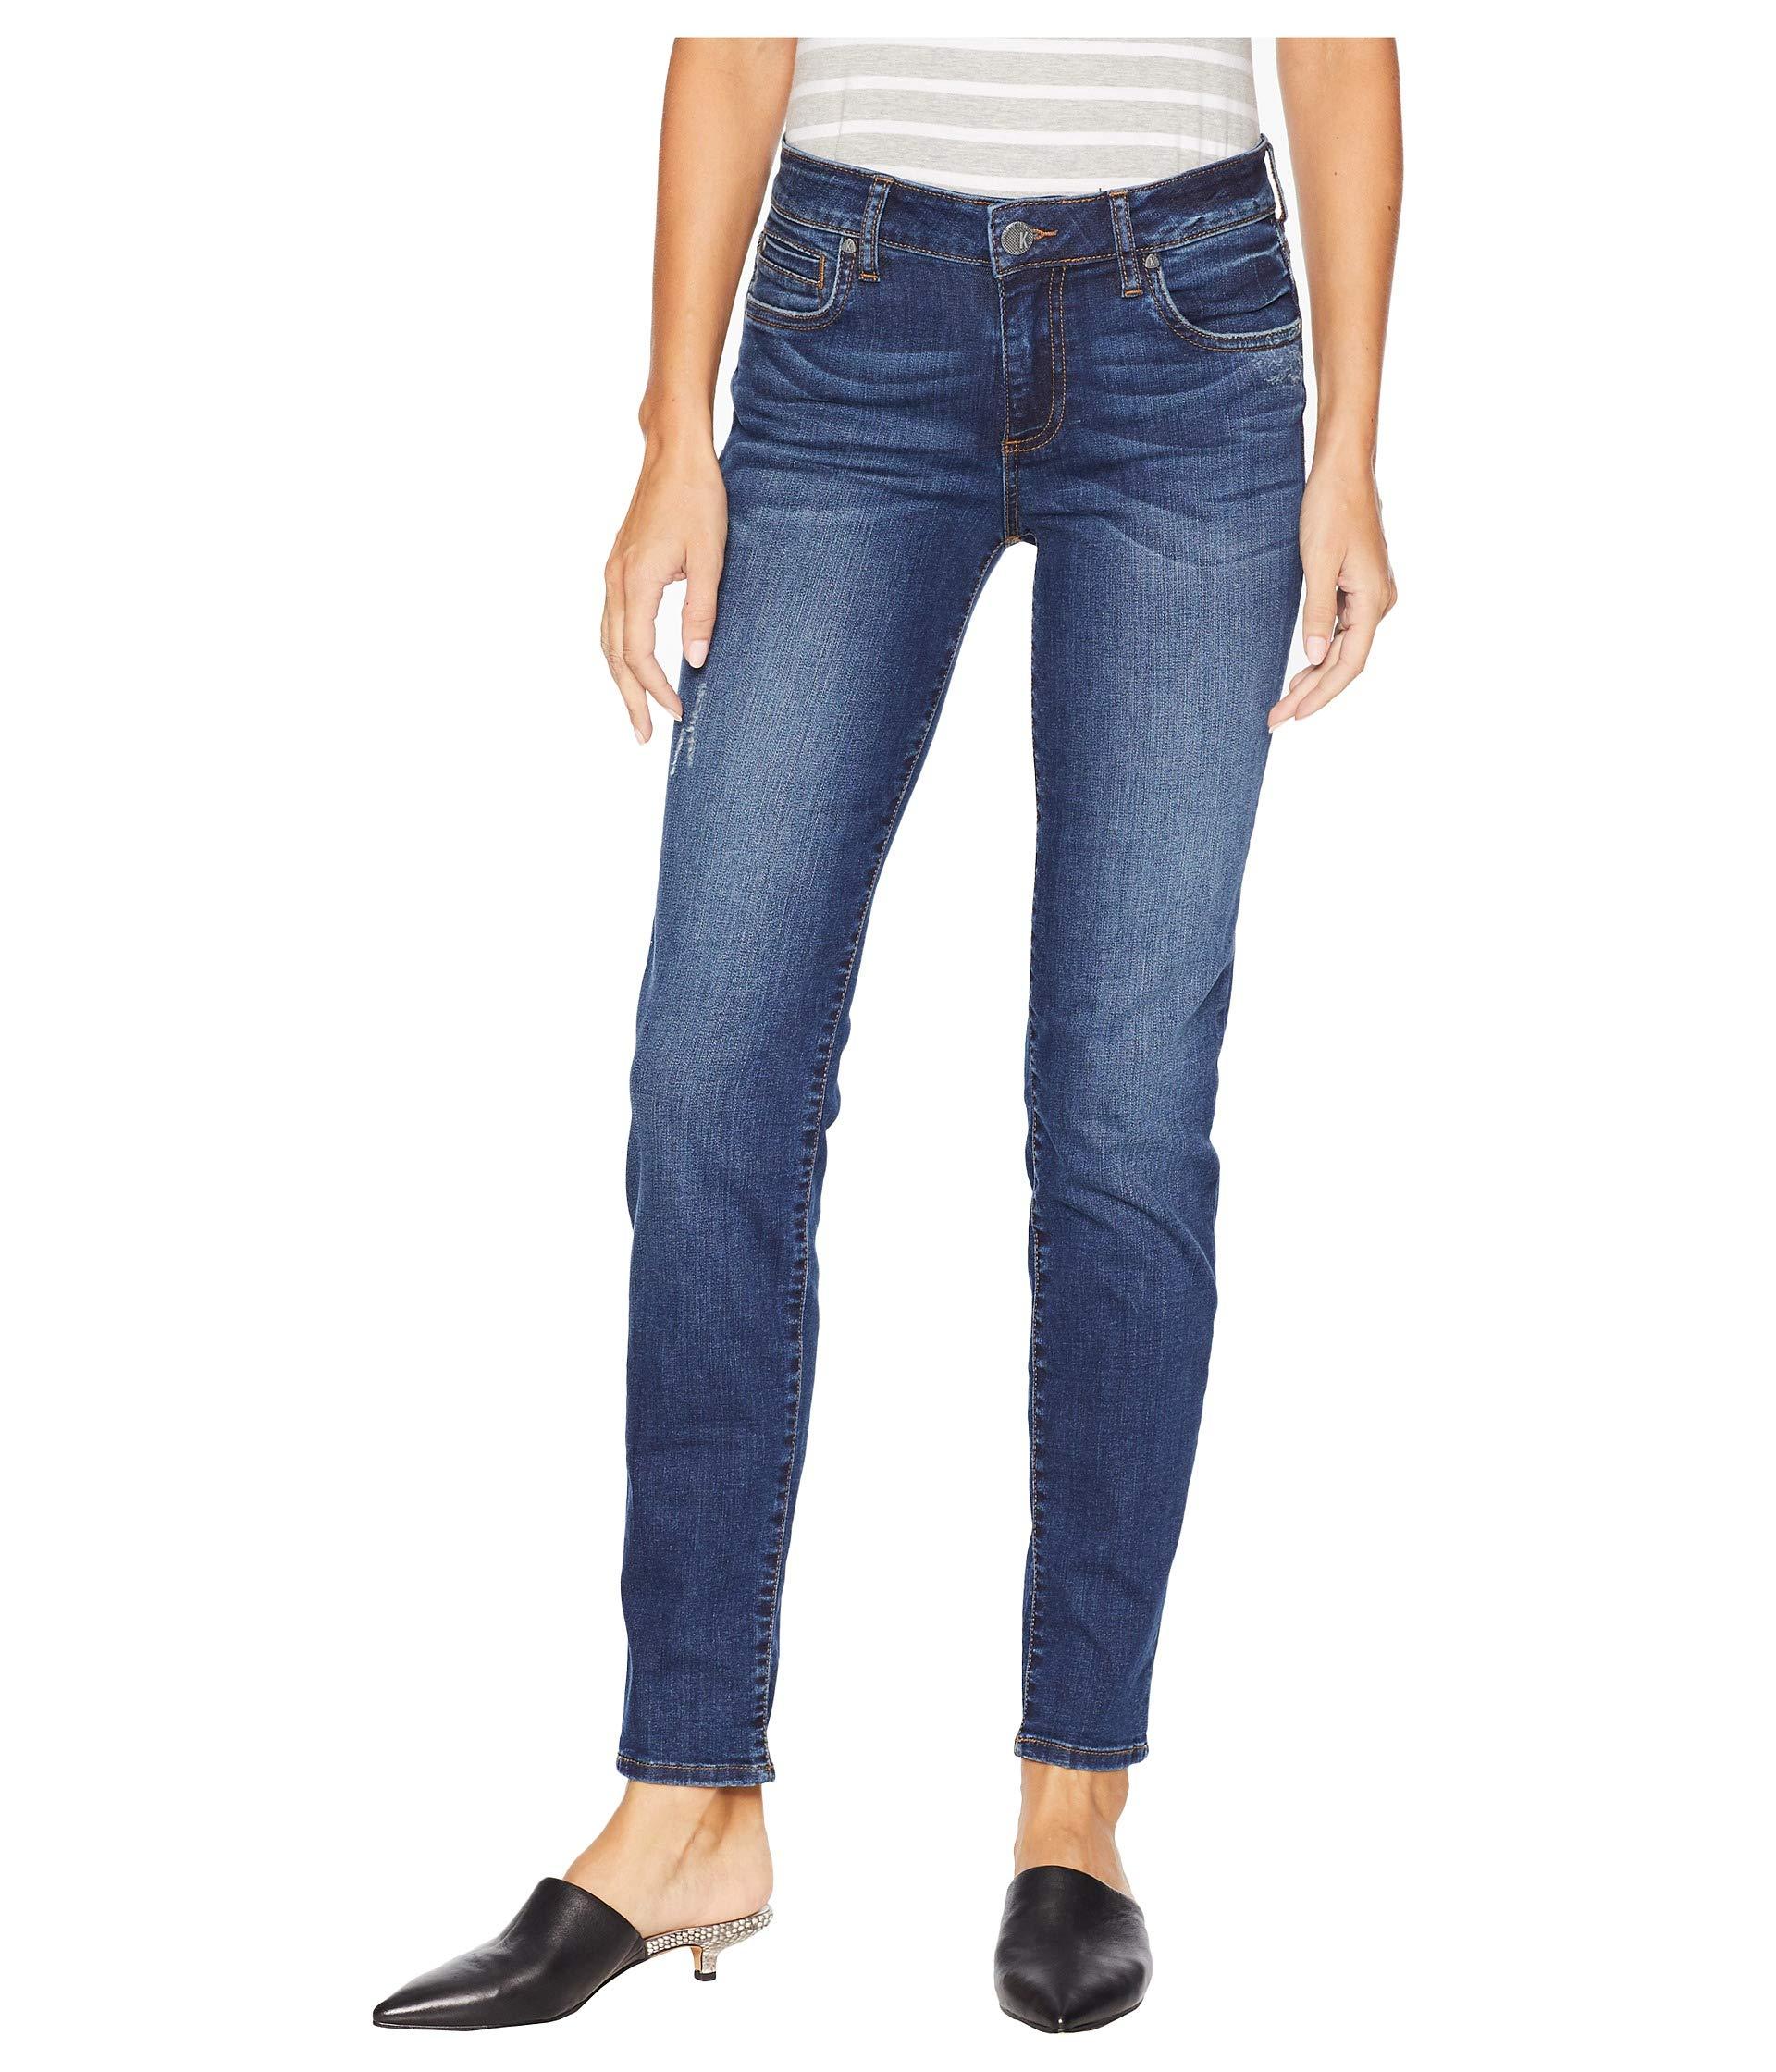 Kut From The Kloth Denim Diana Skinny Jeans In Engaged in Blue - Lyst